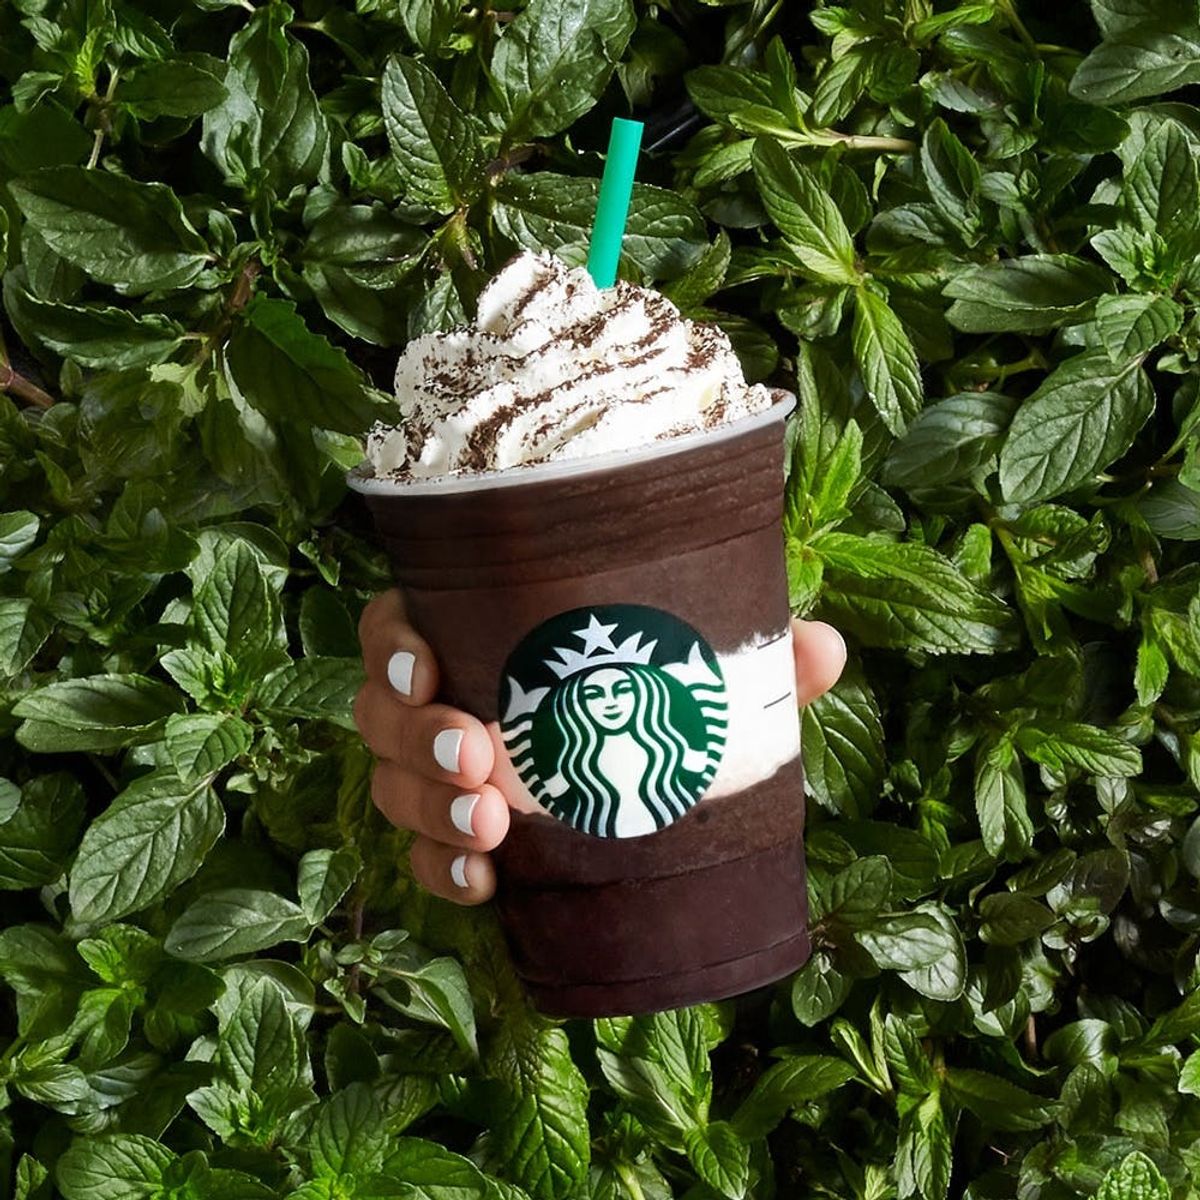 Starbucks’ New Frappuccino Is All About the Flavor